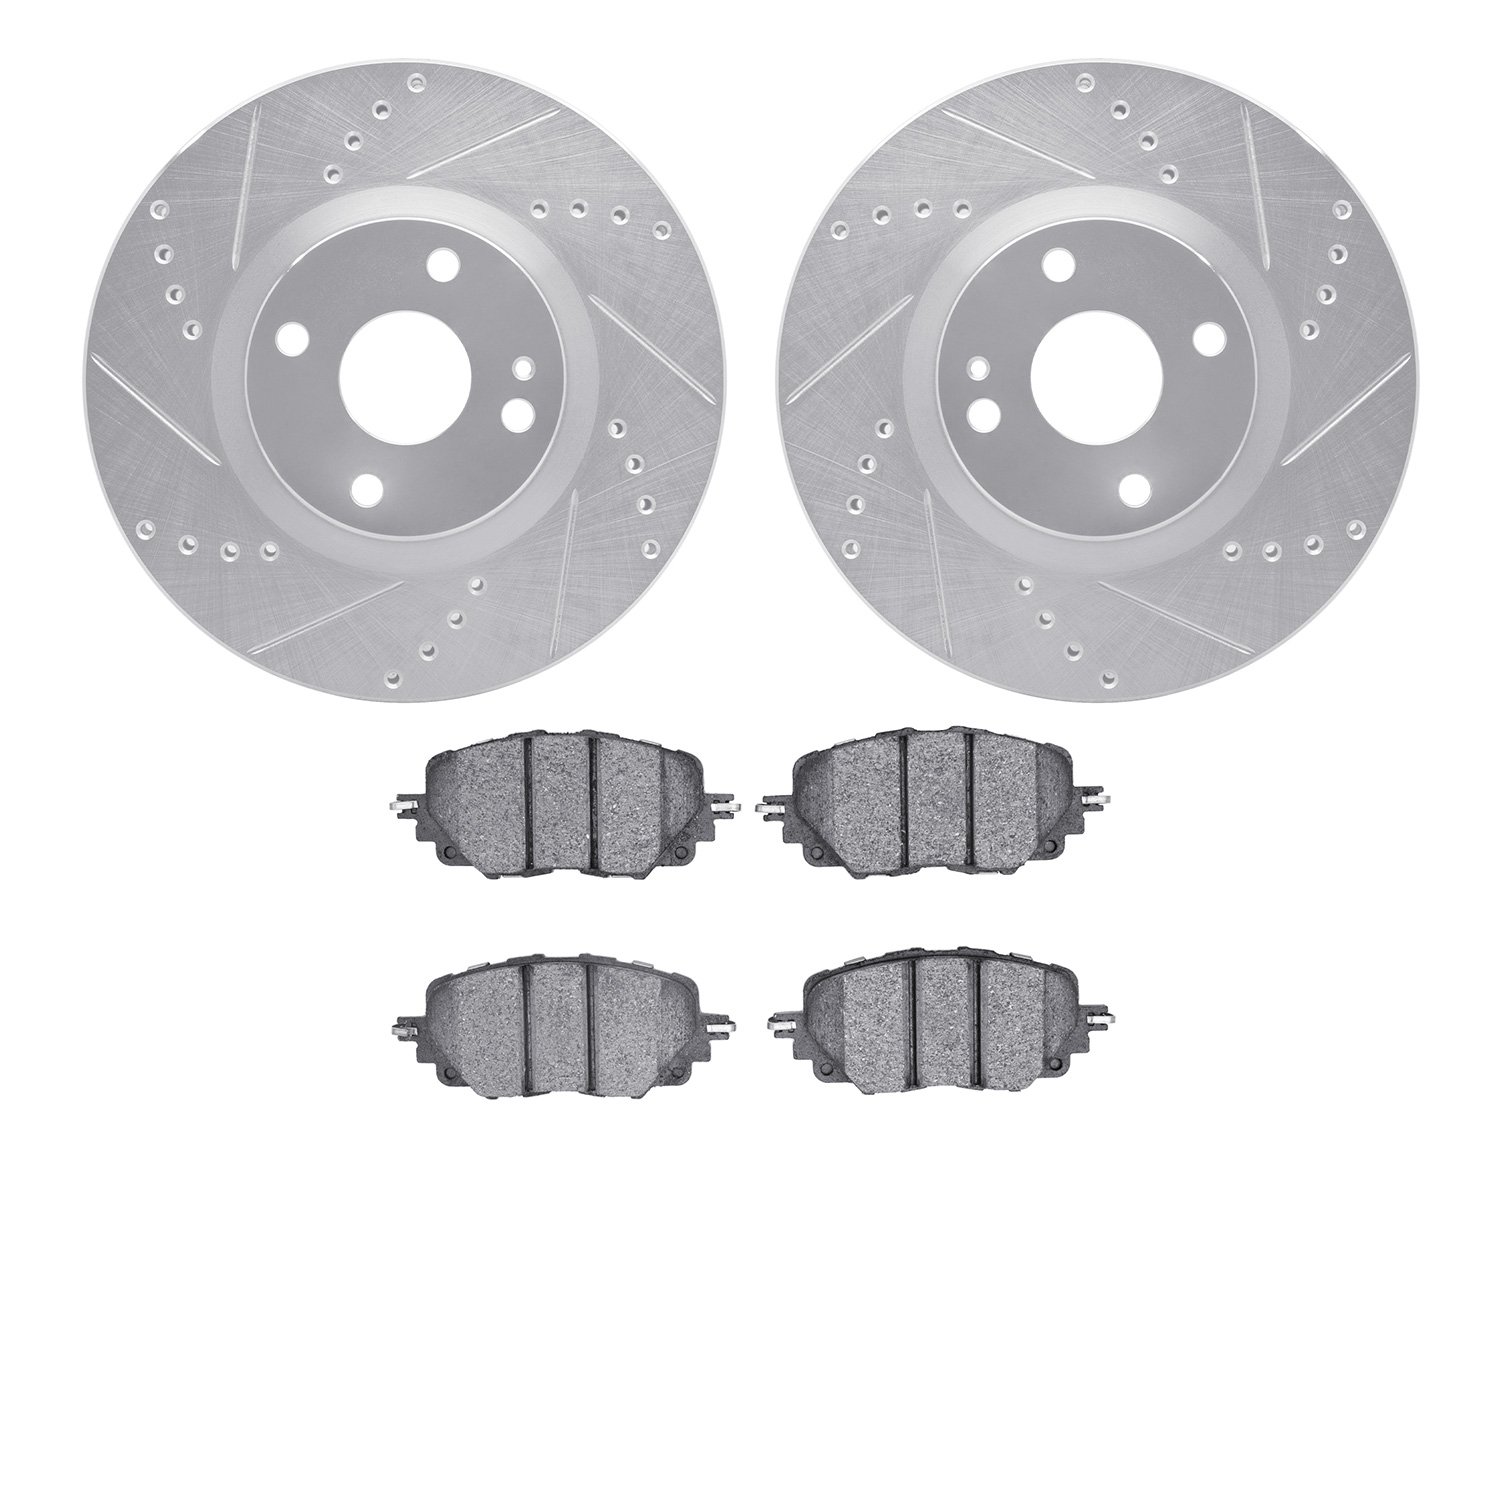 7602-80008 Drilled/Slotted Brake Rotors w/5000 Euro Ceramic Brake Pads Kit [Silver], Fits Select Multiple Makes/Models, Position